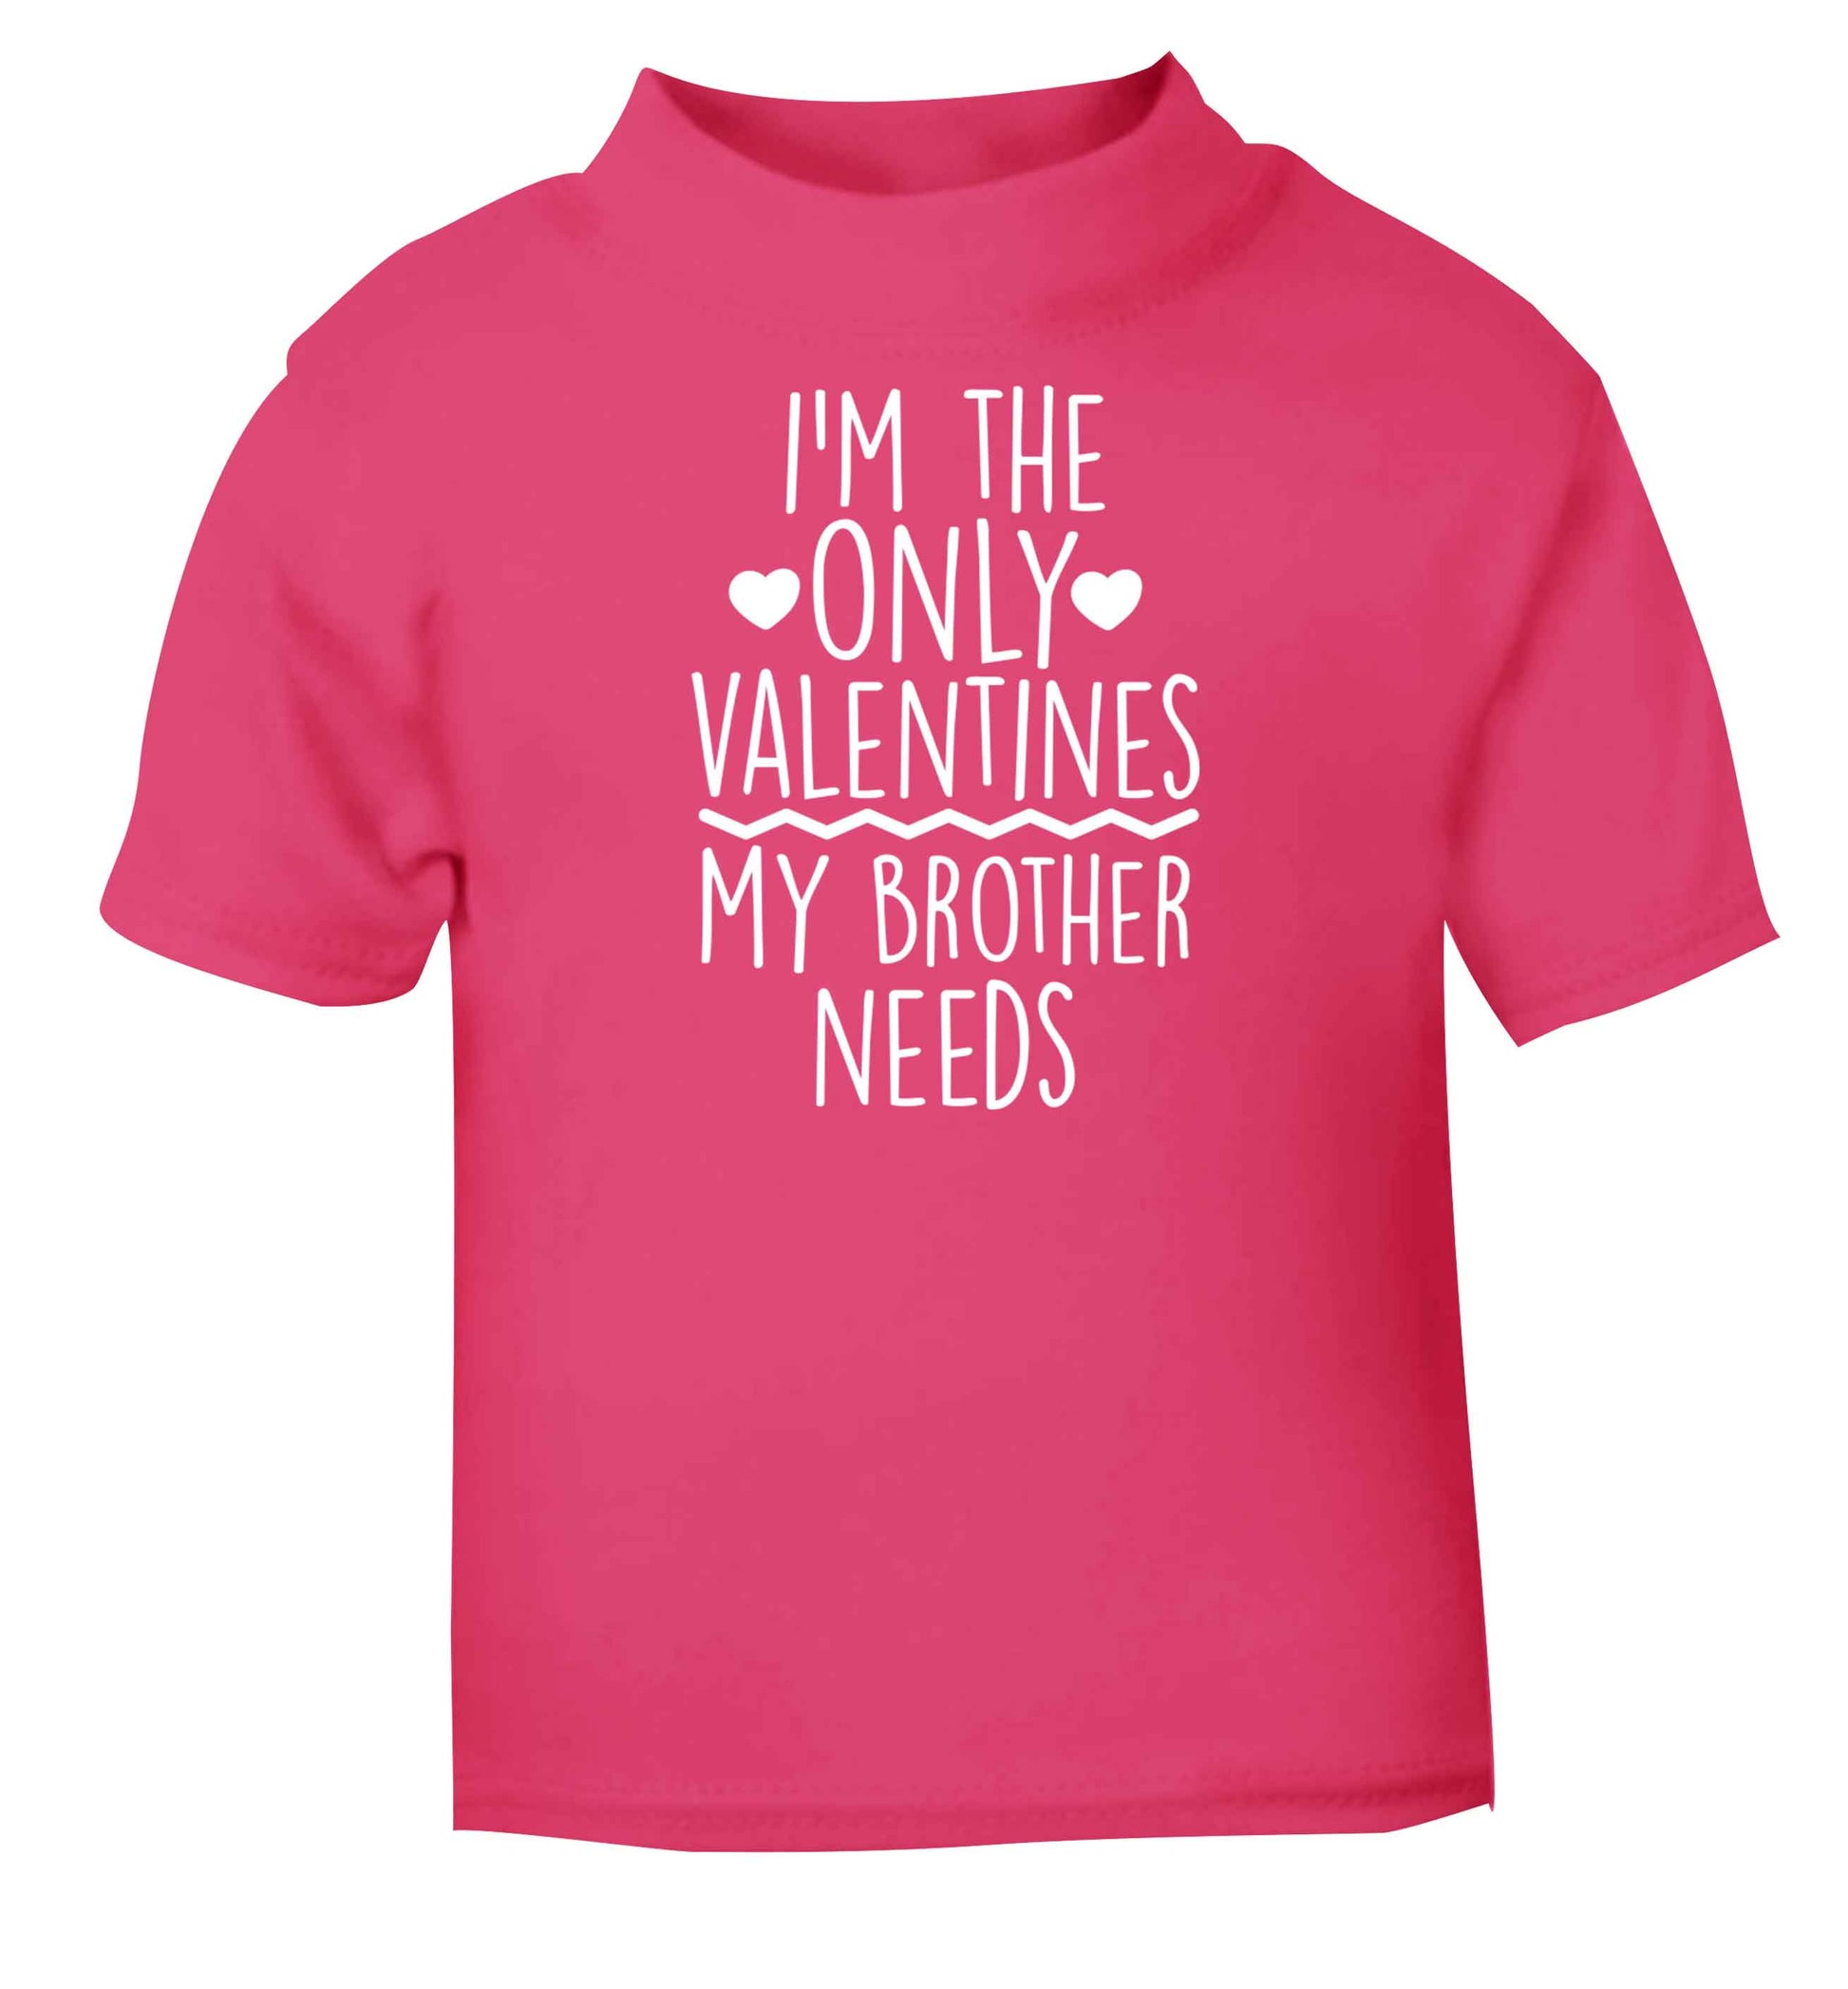 I'm the only valentines my brother needs pink baby toddler Tshirt 2 Years